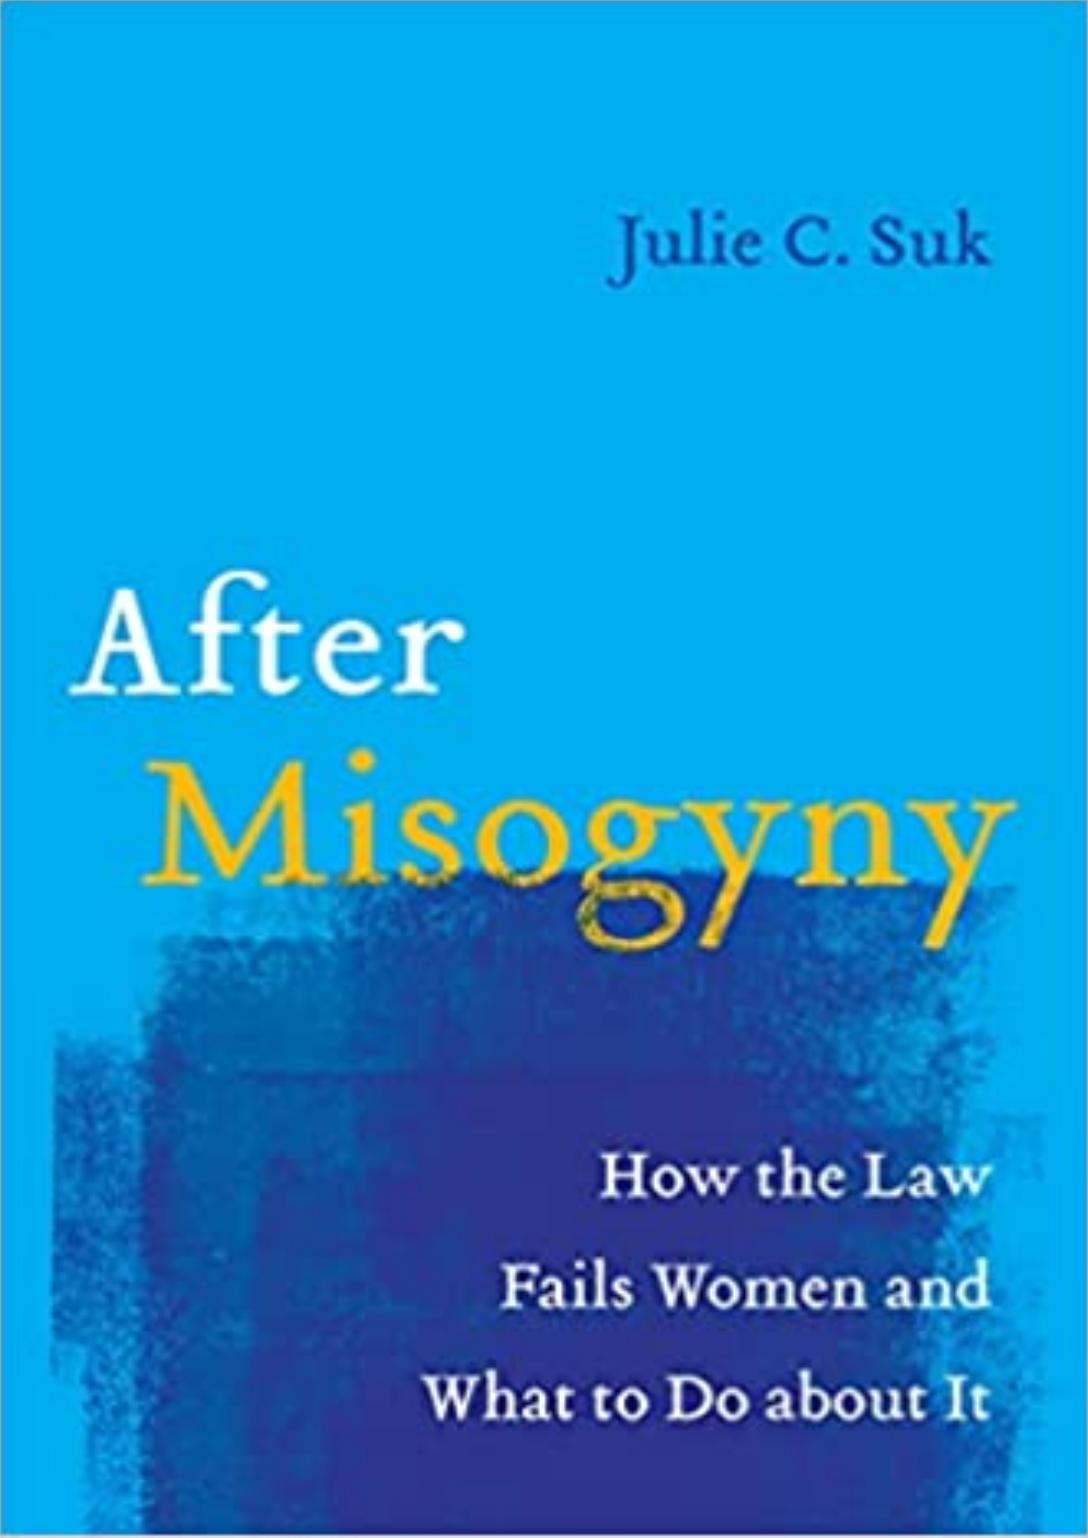 After Misogyny How the Law Fails Women and What to Do about It by Julie C. Suk (